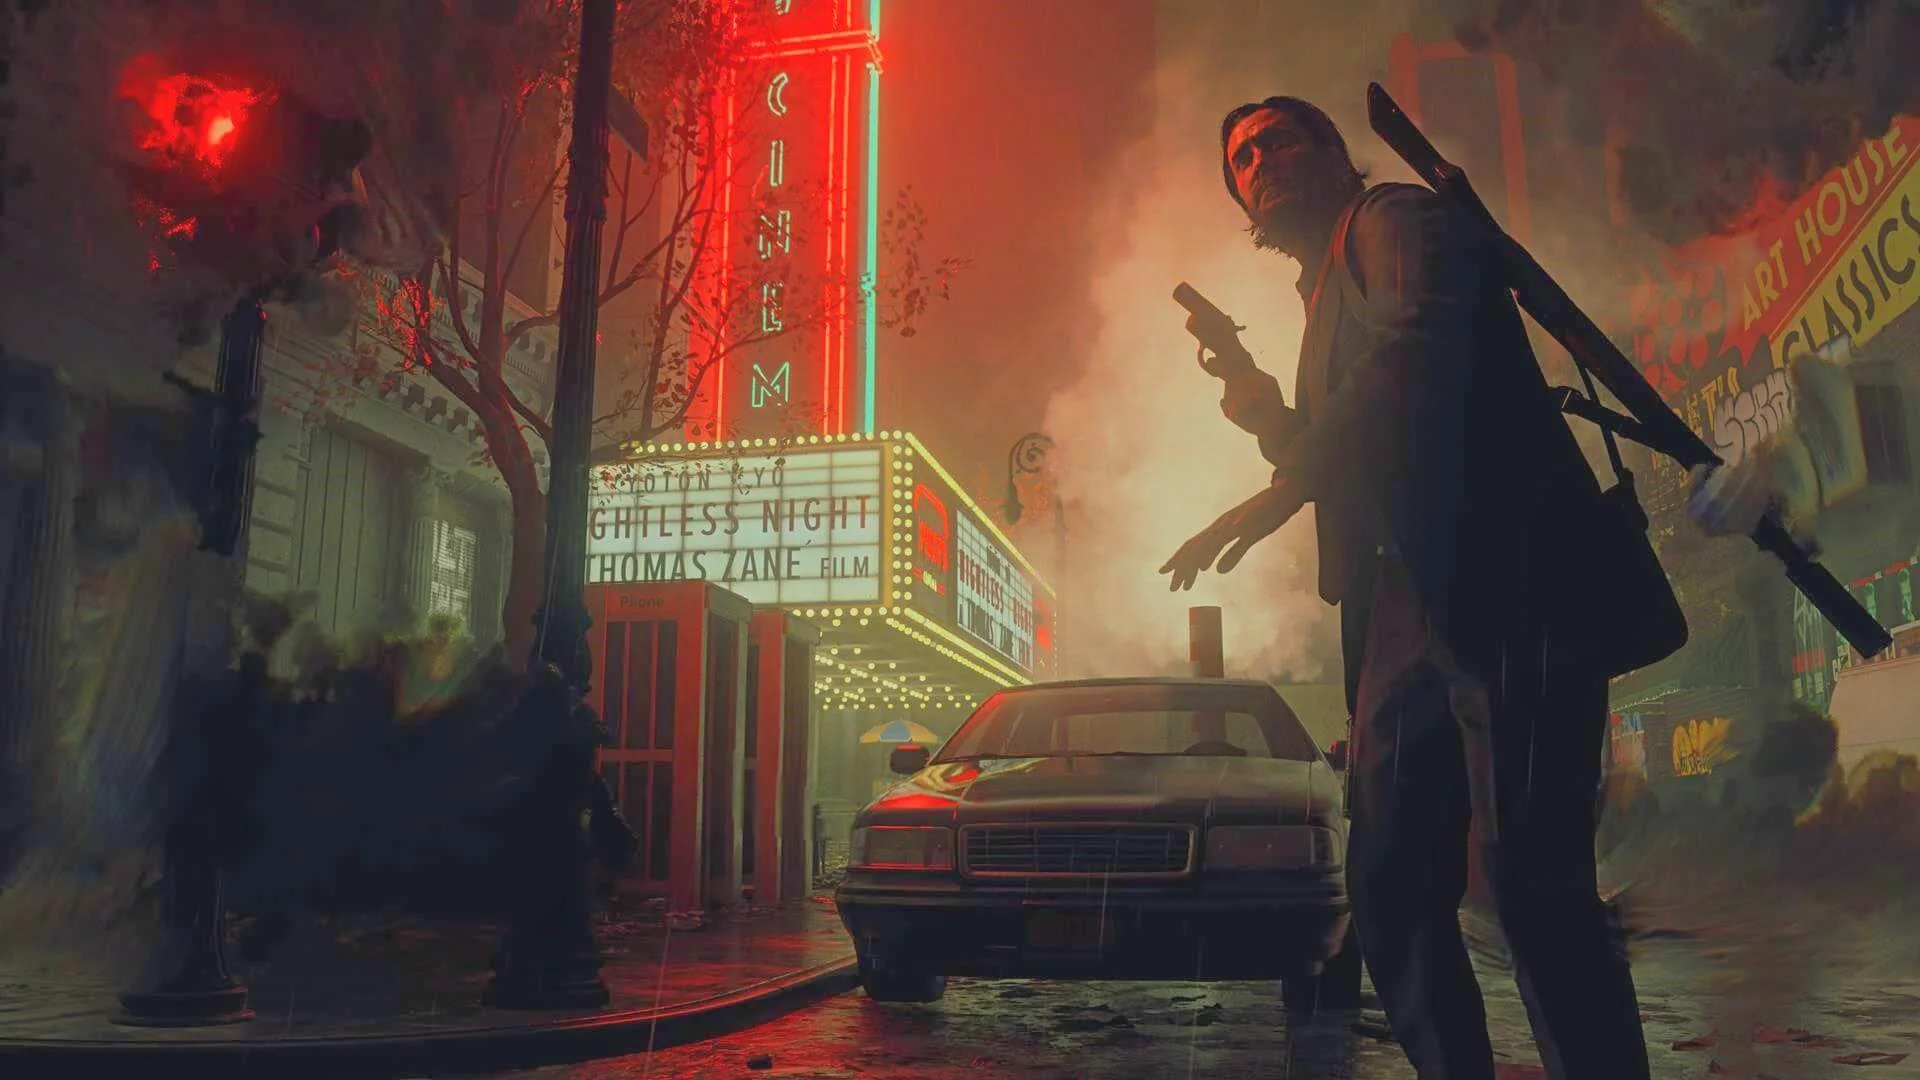 Sales of Alan Wake 2 pleased Remedy, but the project didn’t even break even